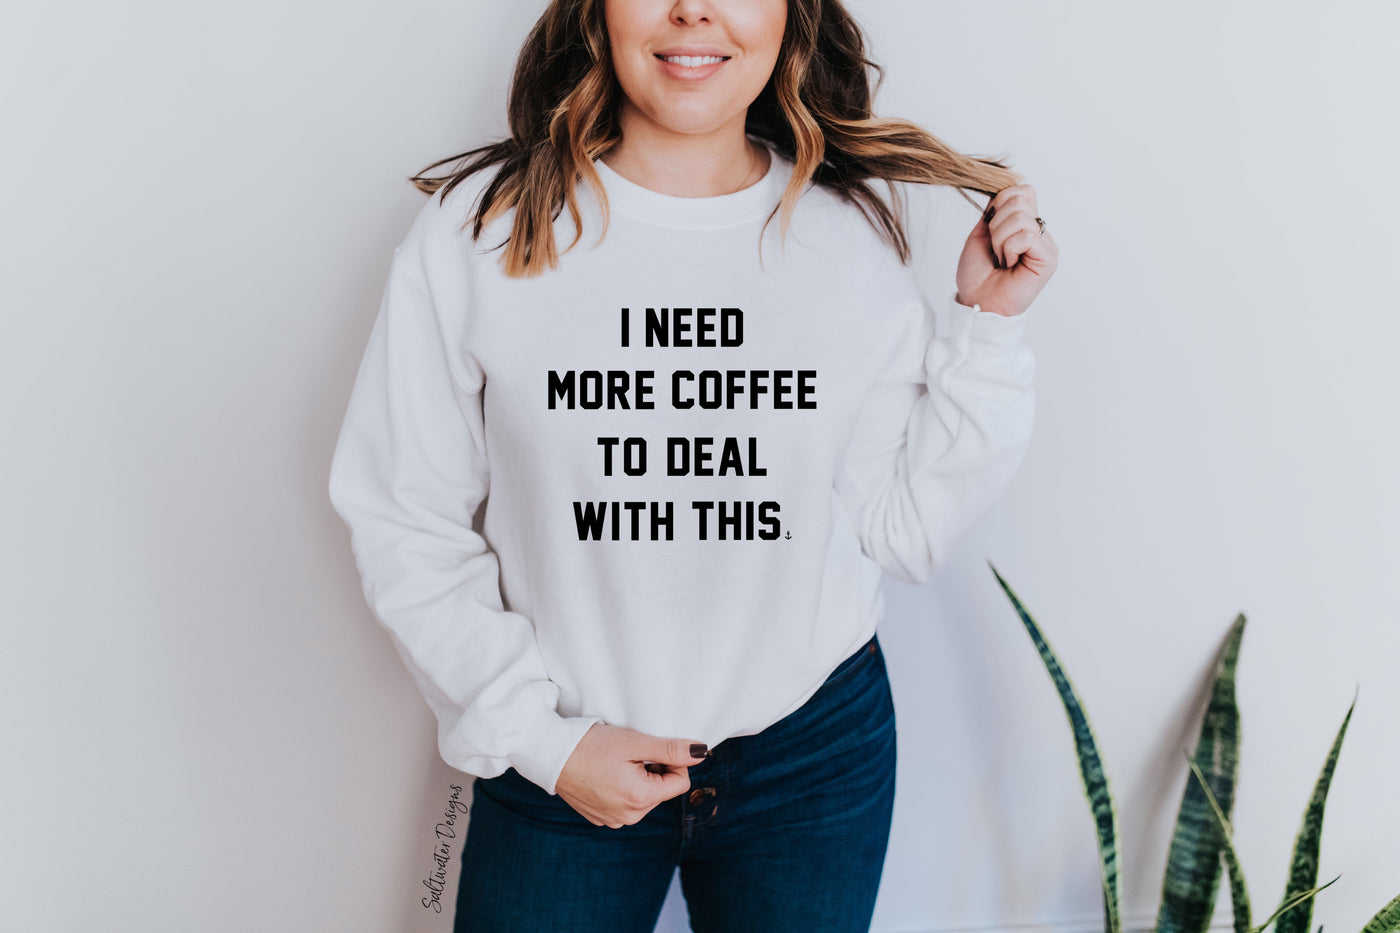 "I Need More Coffee To Deal With This" Unisex Crewneck Sweatshirt